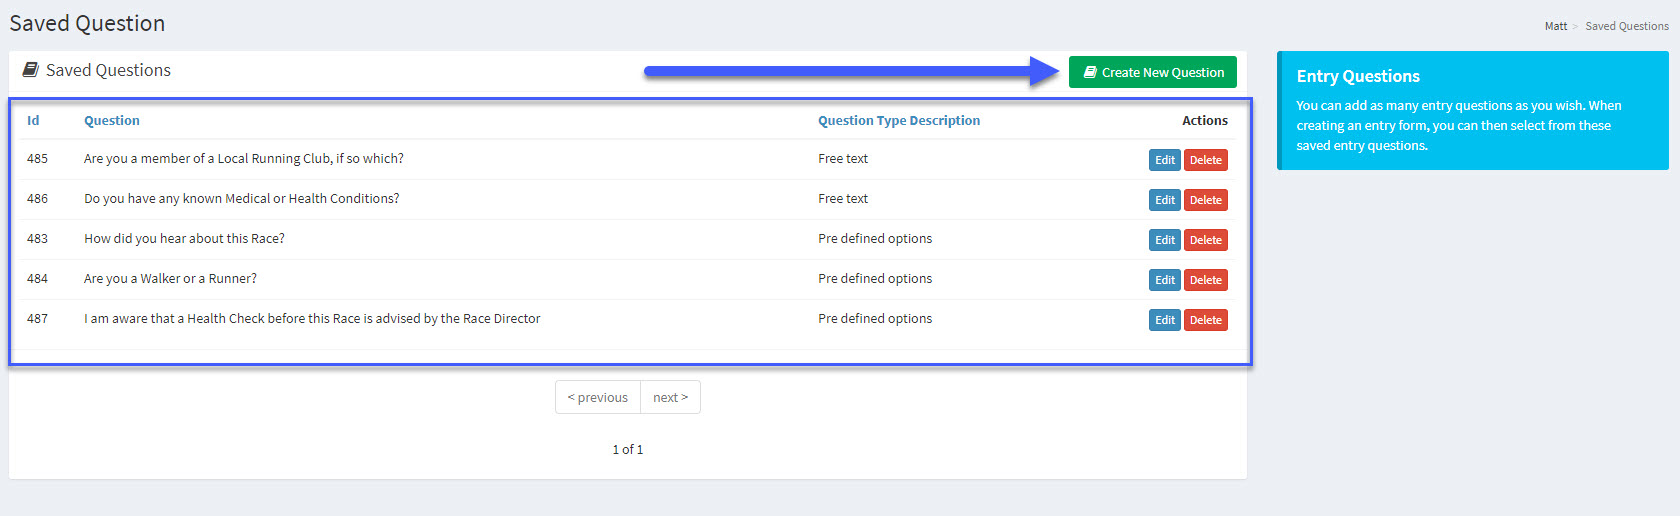 How to Add Custom Questions to your Entry Form